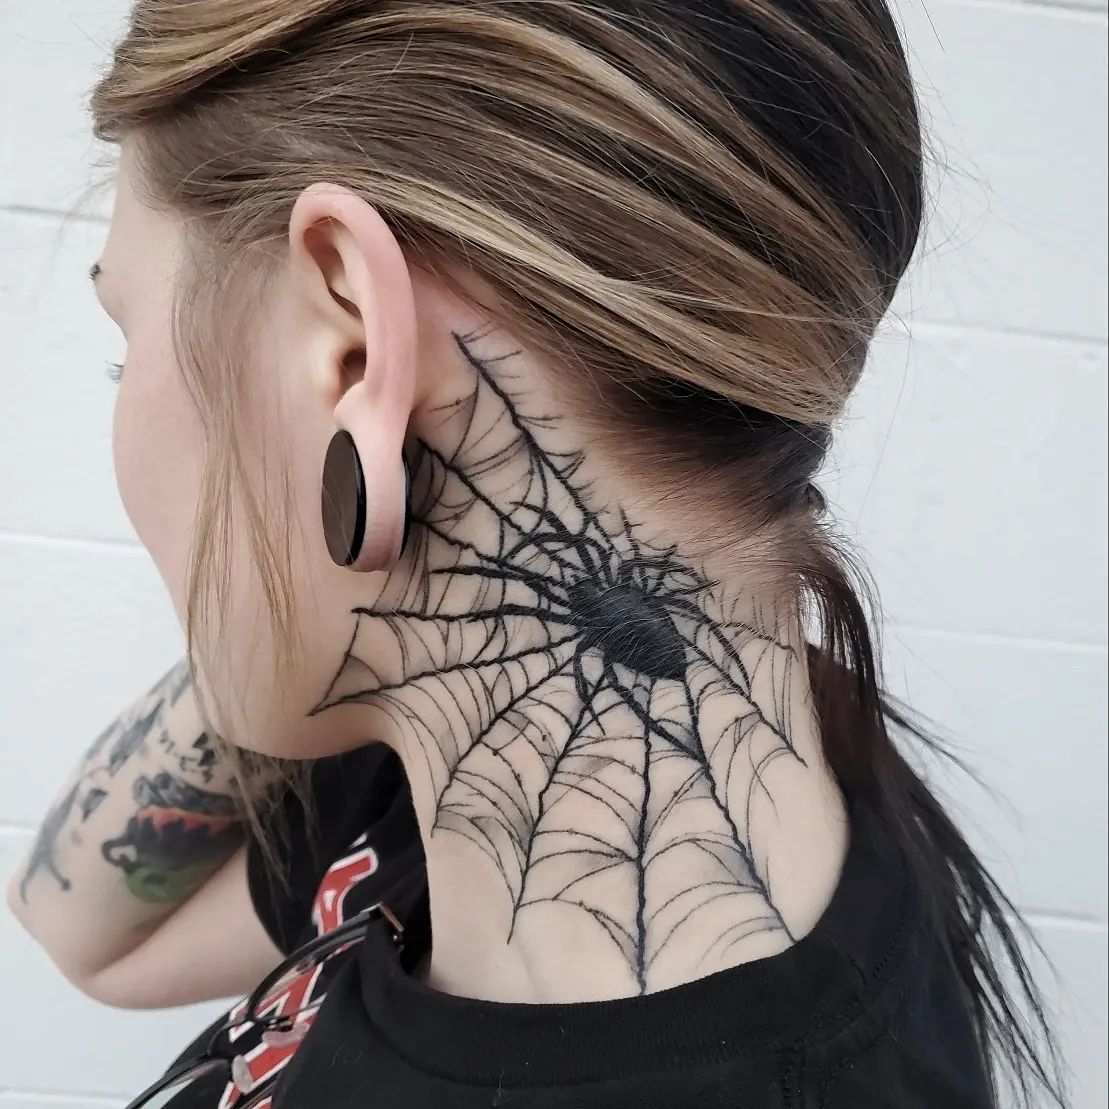 Spider web neck tattoo meaning